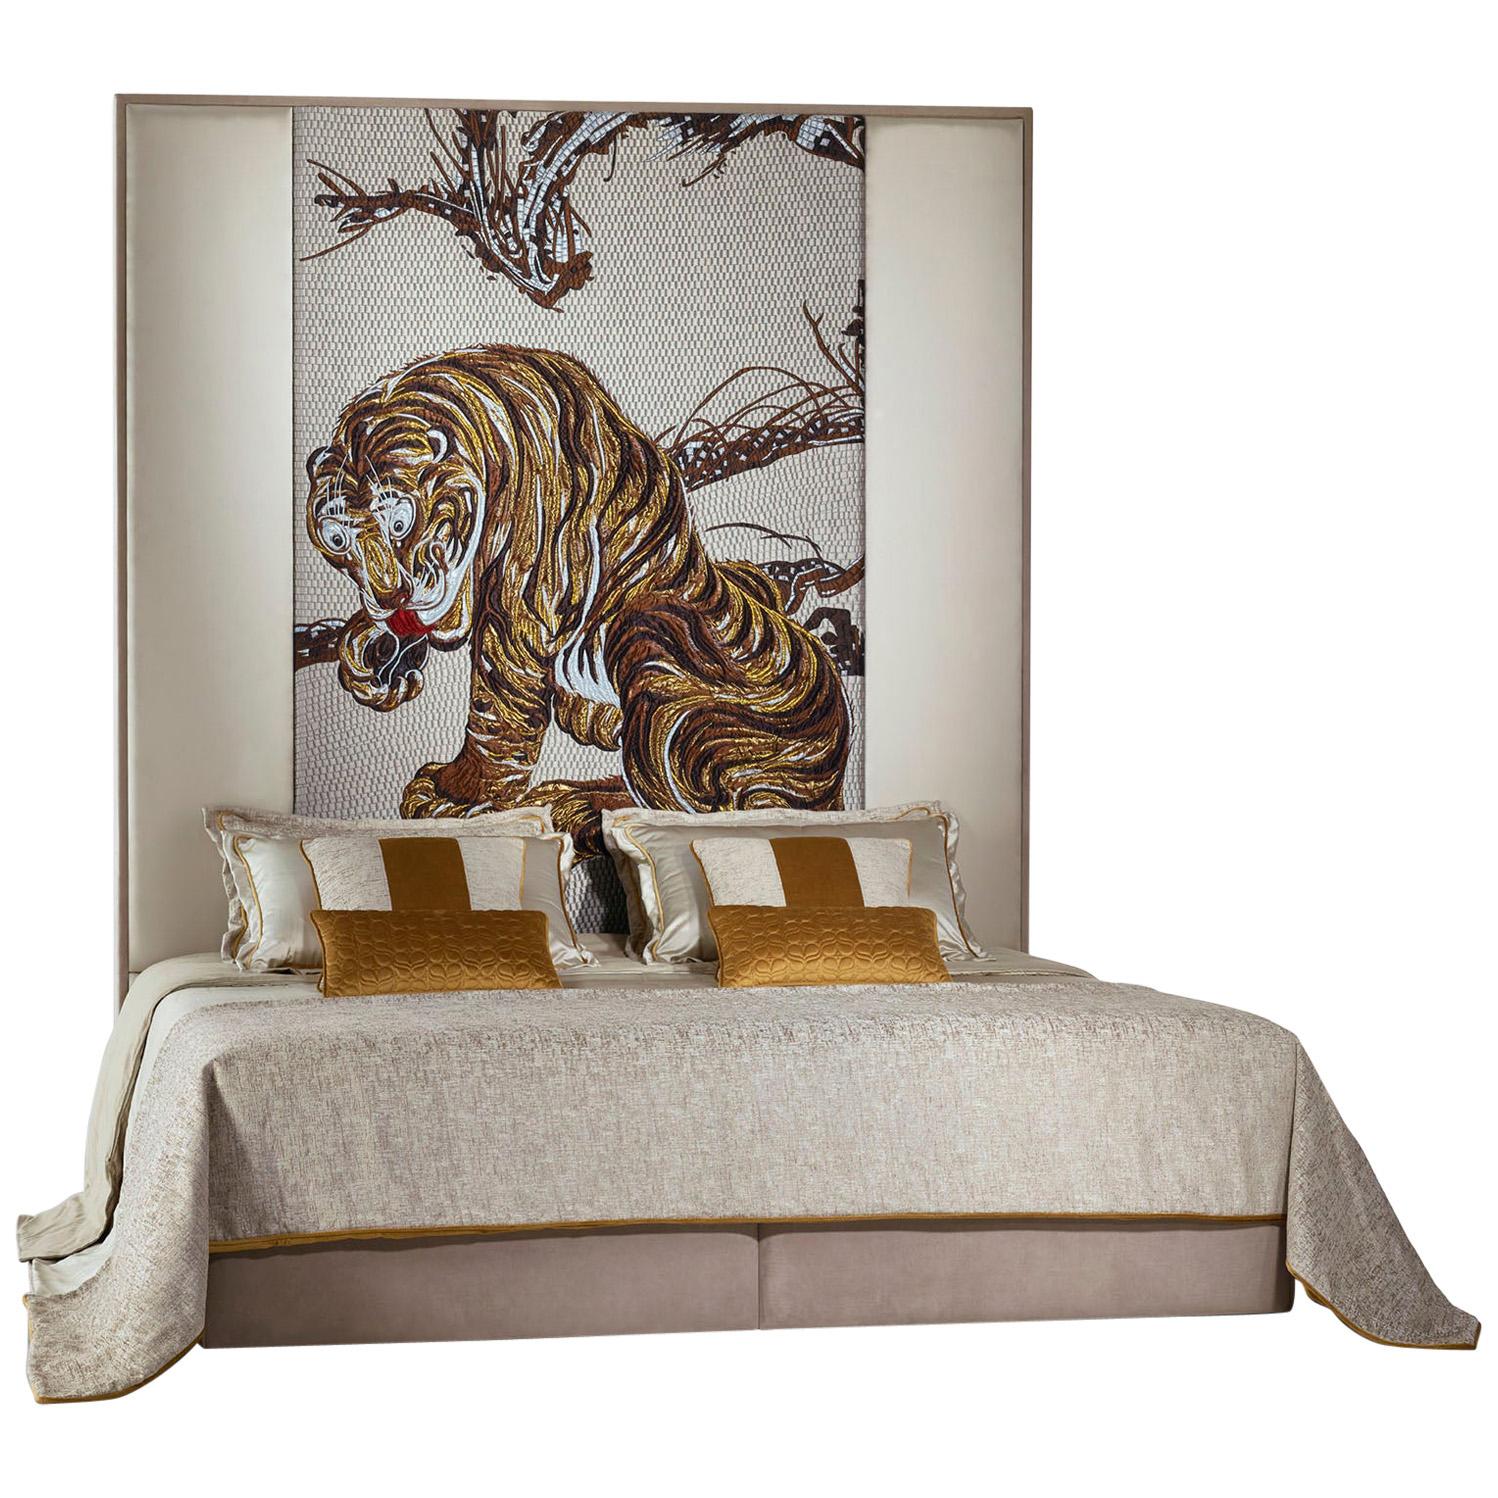 Stylish Bed Headboard Fabric or Leather Upholstery Tiger Tapestry Middle Panel